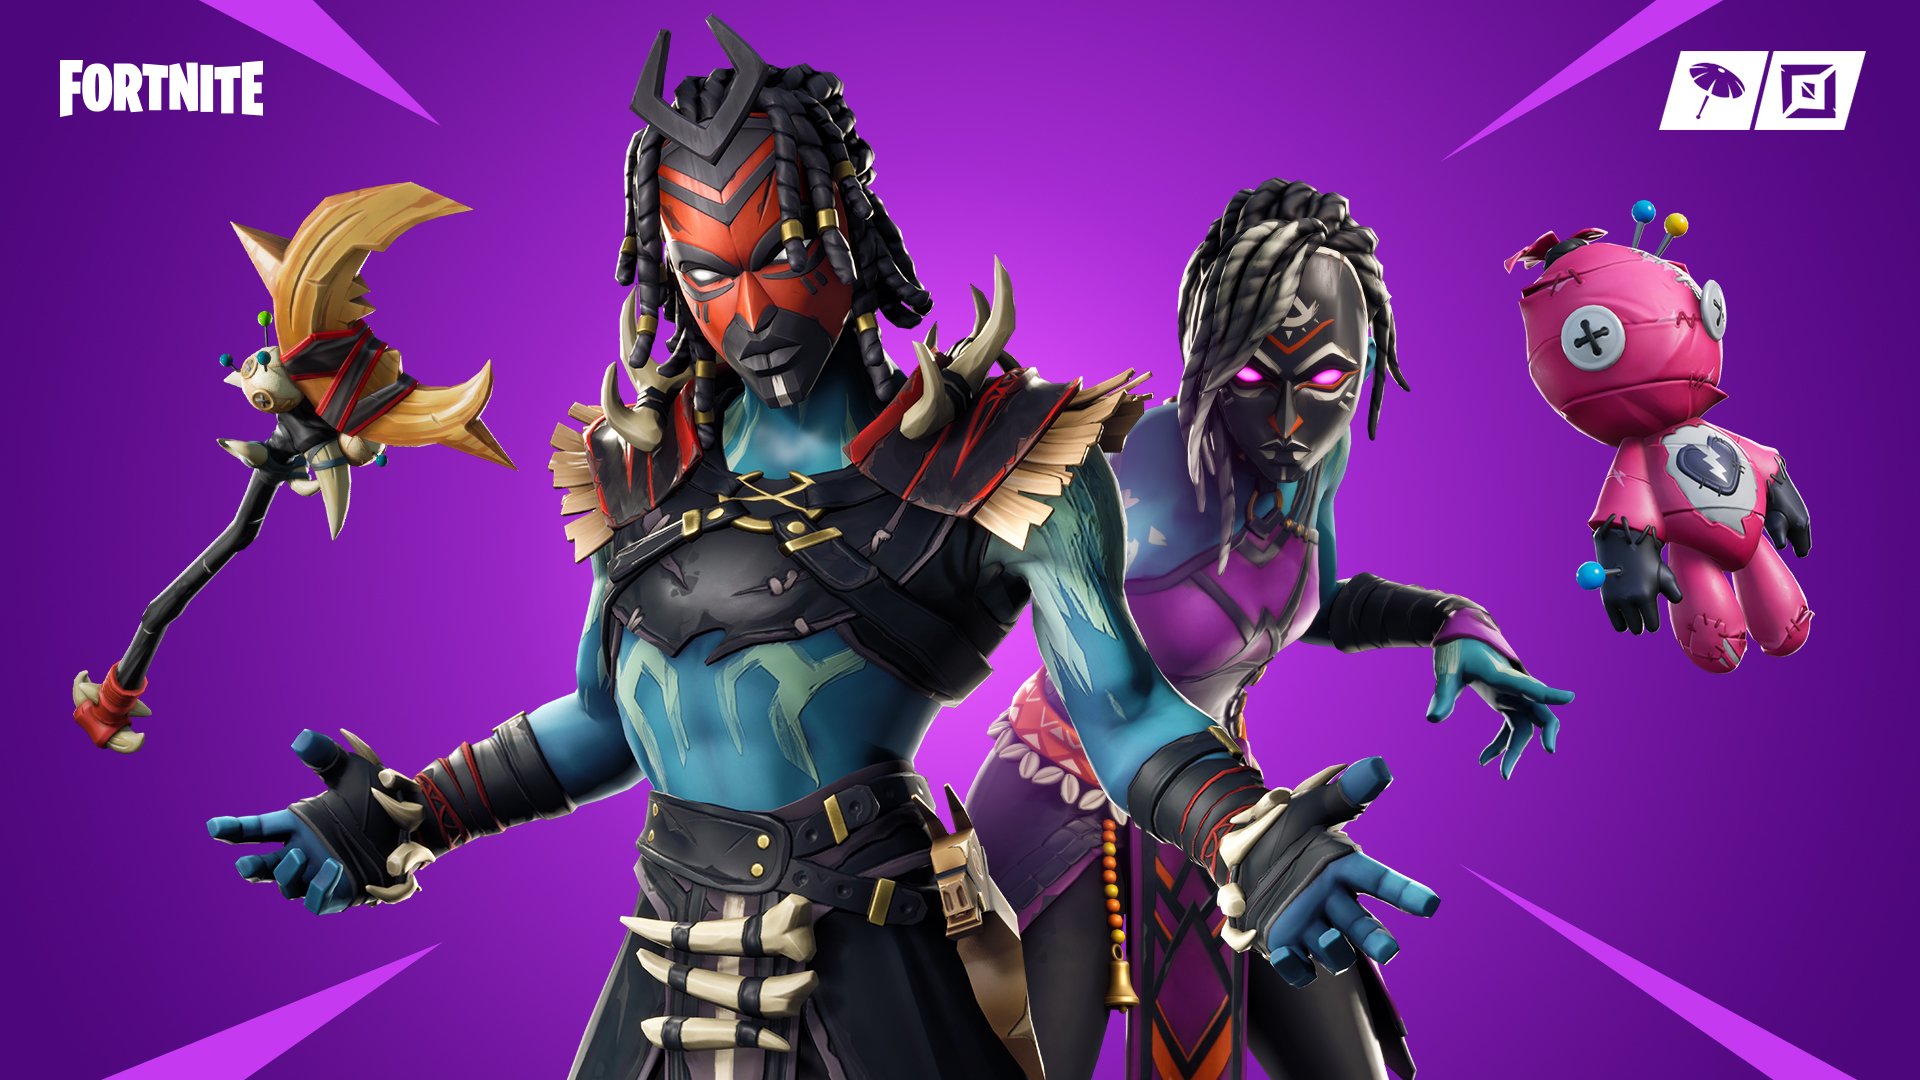 Nightwitch Fortnite Wallpapers